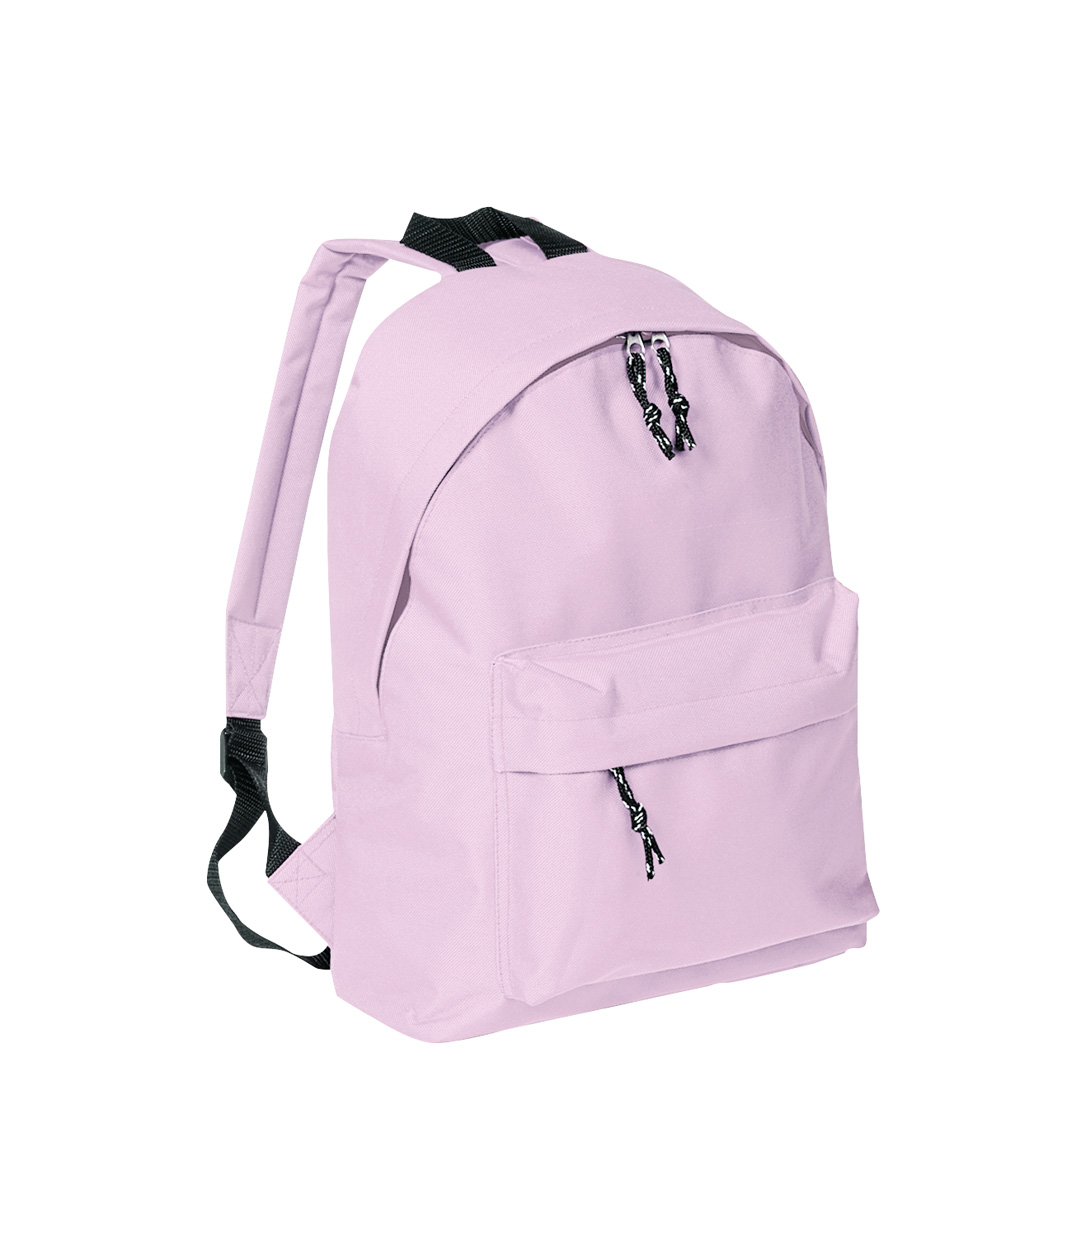 Discovery backpack - pink